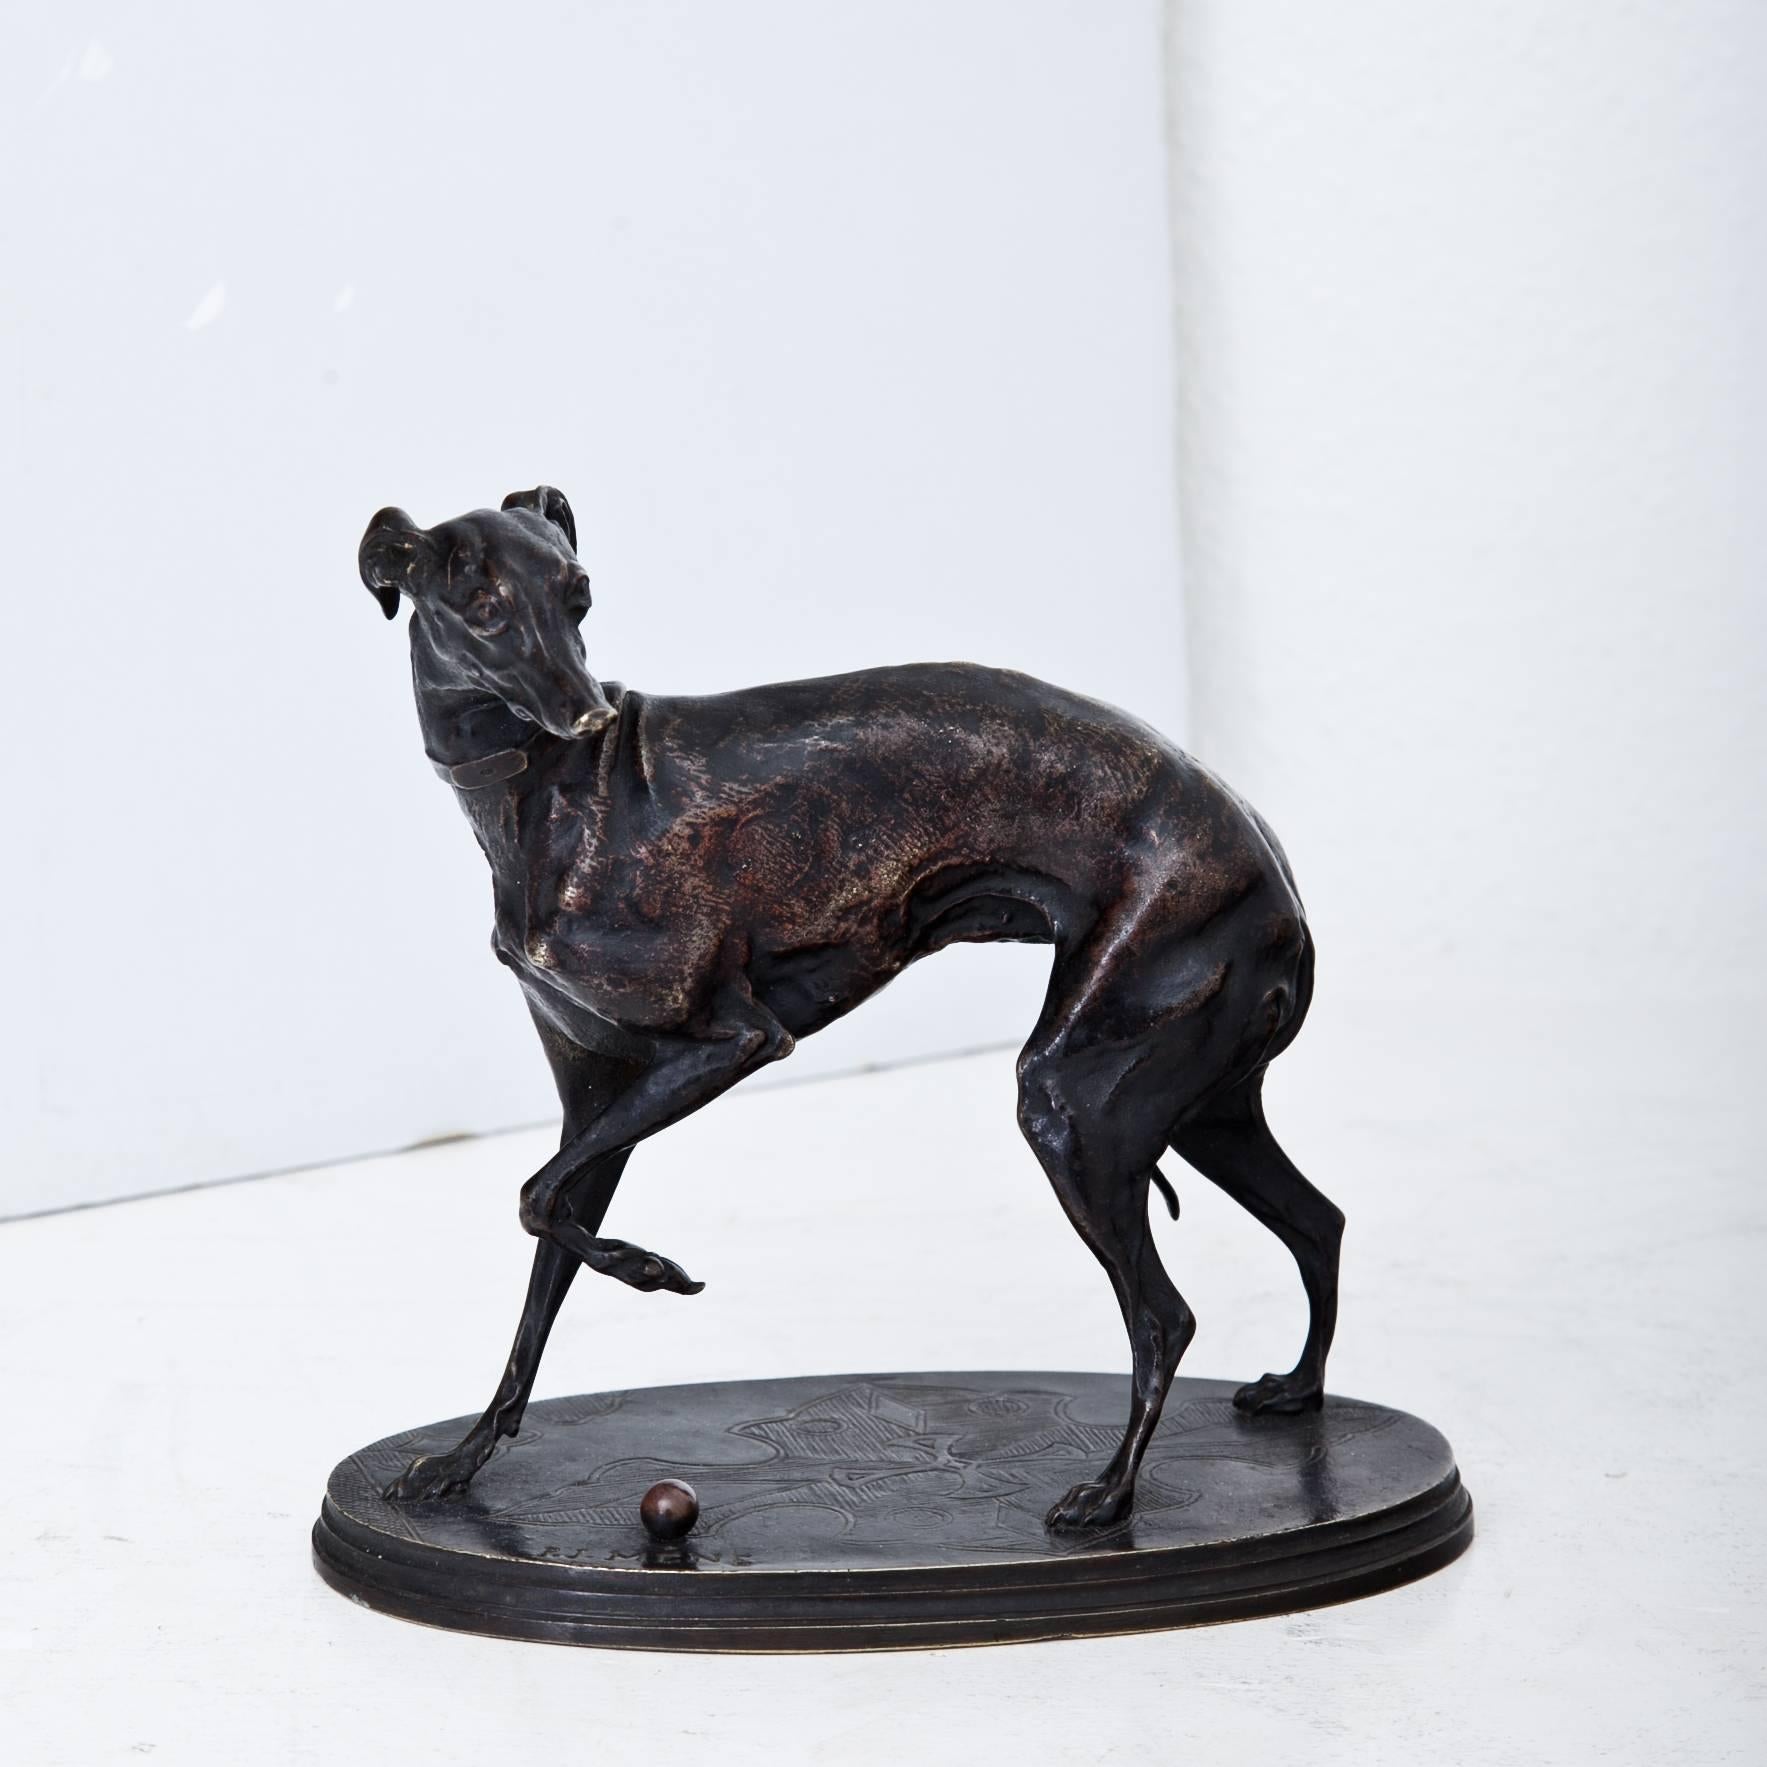 Naturalistically modelled bronze greyhound playing ball by Pierre-Jules Mène (1810-1879), France 19th Century. Signature at the oval plinth by P.J. Mène. Mène was autodidact and his works are among others part of the collections of the museums La